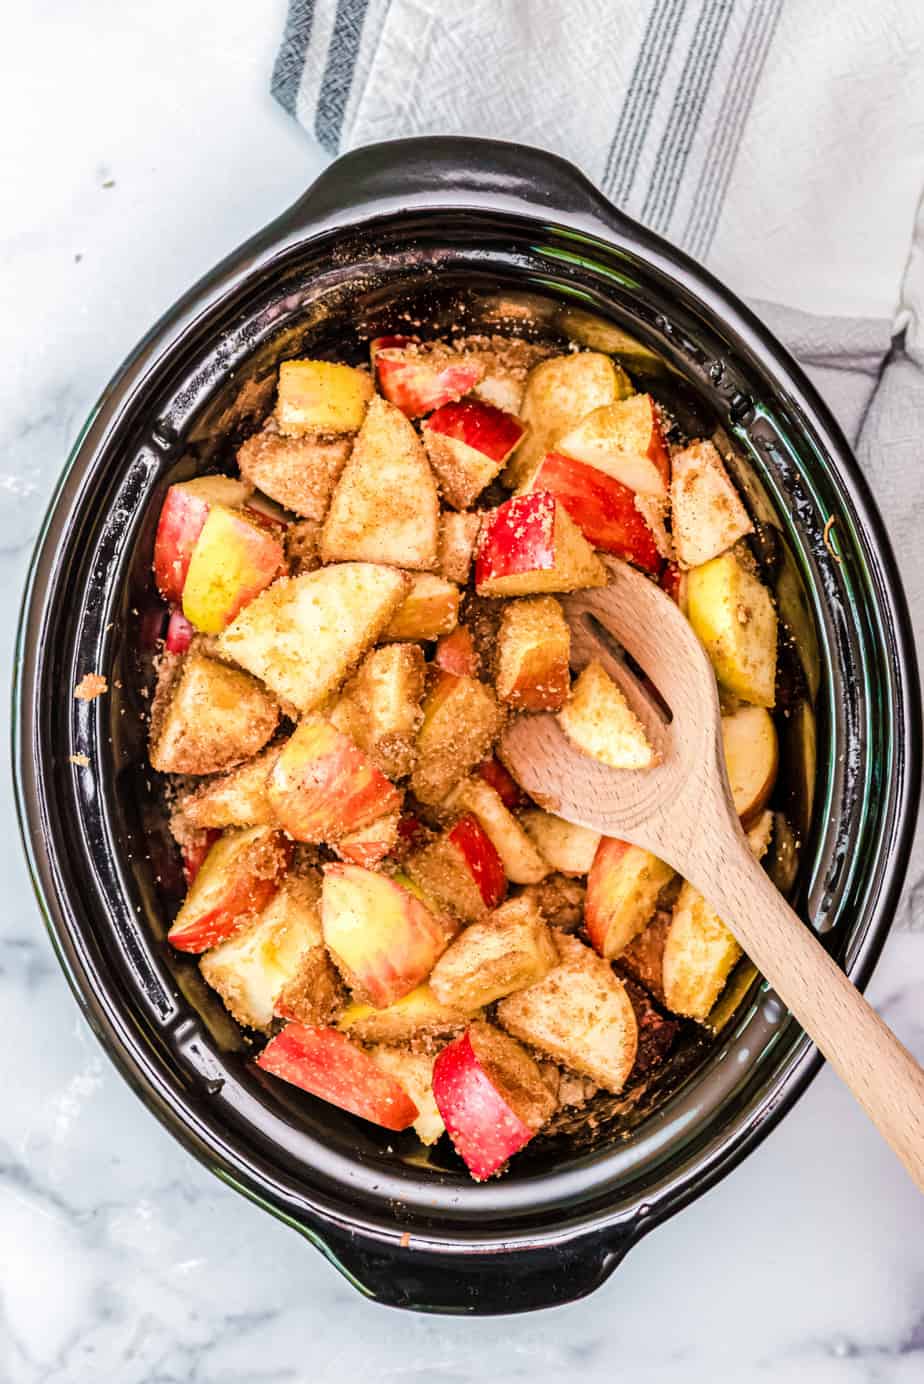 Sliced apples mixed with brown sugar and spices in a slow cooker with a spoon